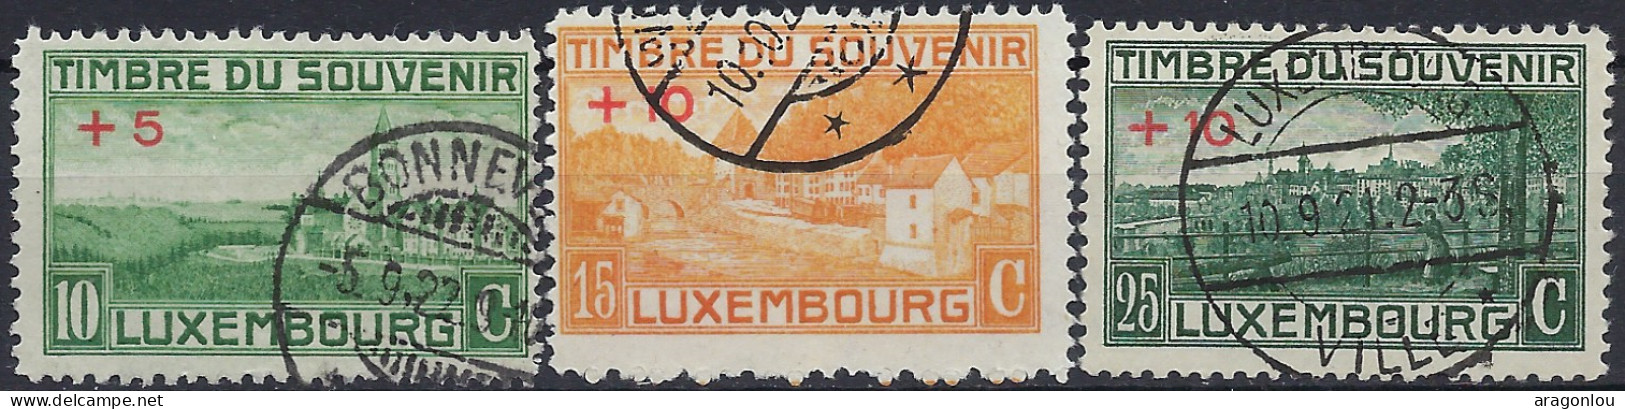 Luxembourg - Luxemburg - Timbres - 1921   1ière  Guerre Mondiale   Série   °   VC. 20,- - Usati